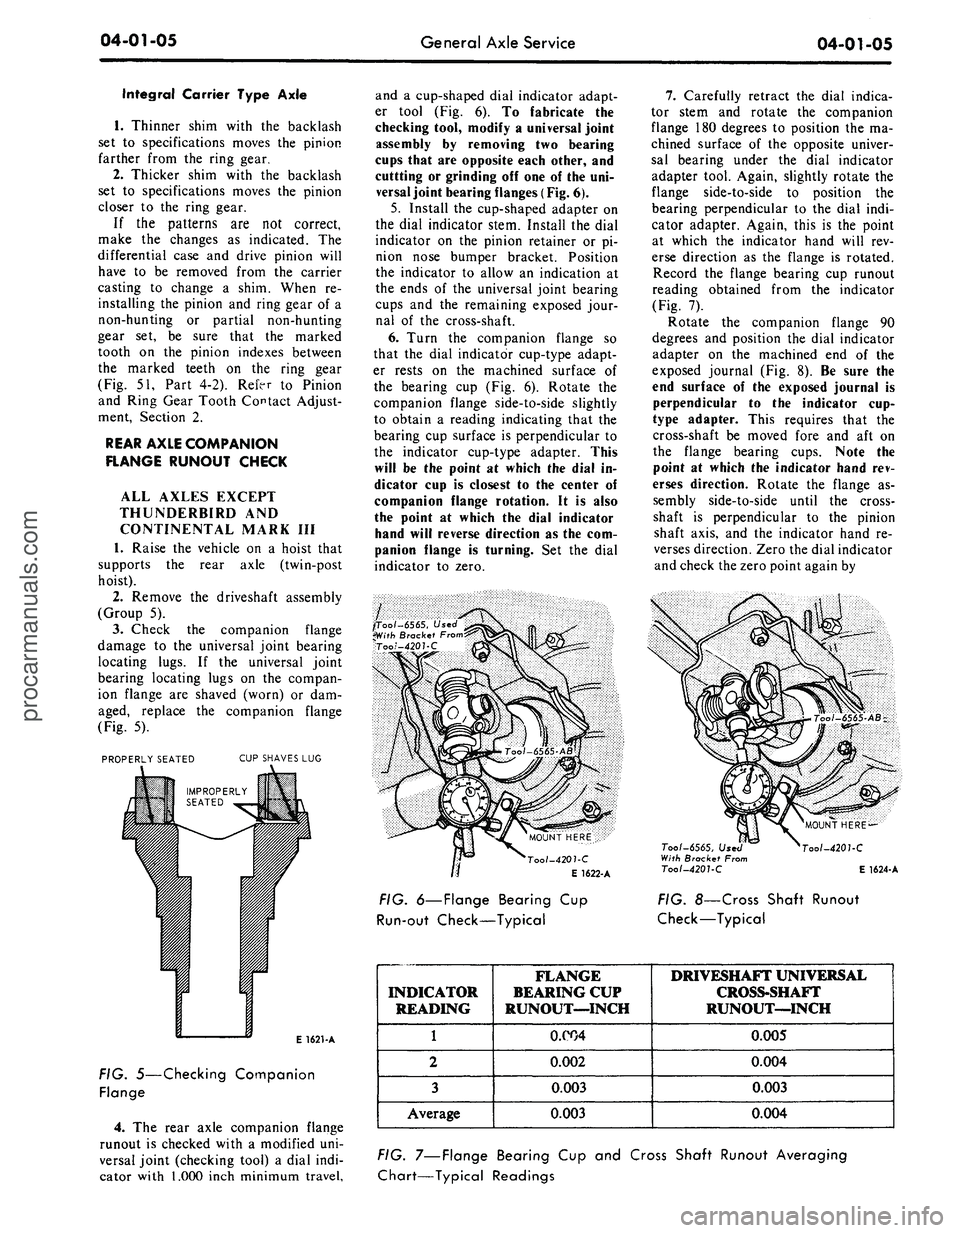 FORD MUSTANG 1969  Volume One Chassis 
04-01-05

General Axle Service

04-01-05

Integral Carrier Type Axle

1.
 Thinner shim with
 the
 backlash

set
 to
 specifications moves
 the
 pinion

farther from
 the
 ring gear.

2.
 Thicker shim